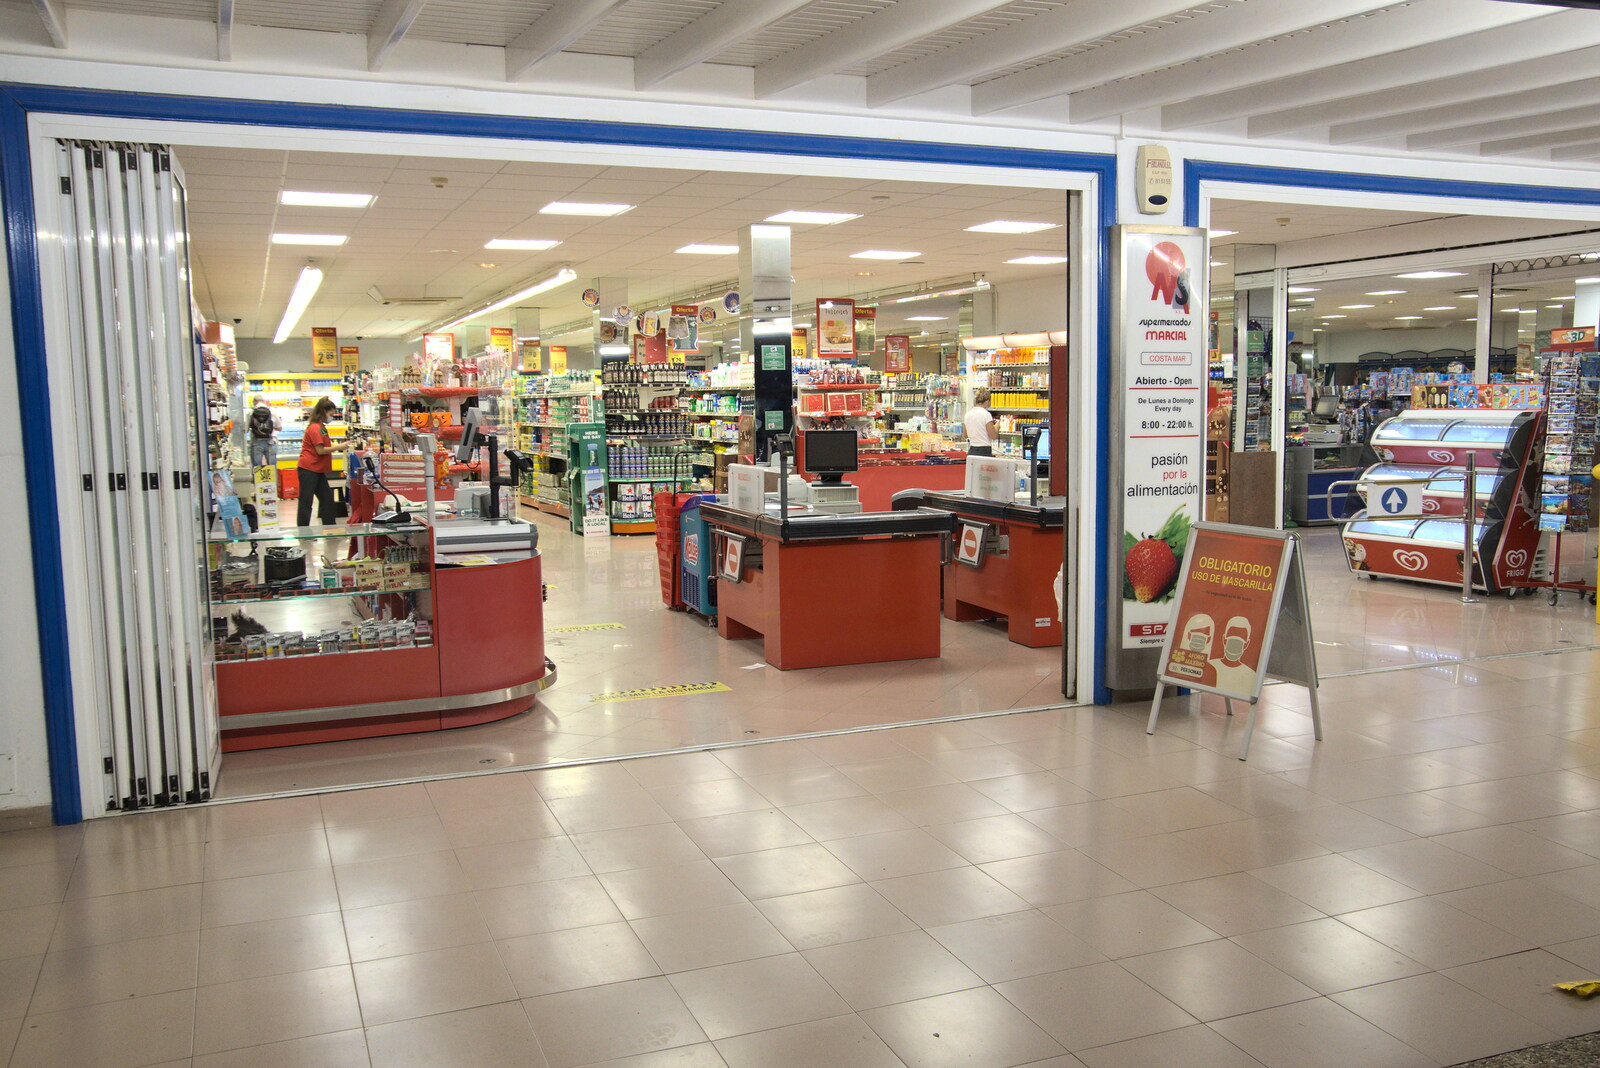 The Spar supermarket, open to the street from Five Days in Lanzarote, Canary Islands, Spain - 24th October 2021